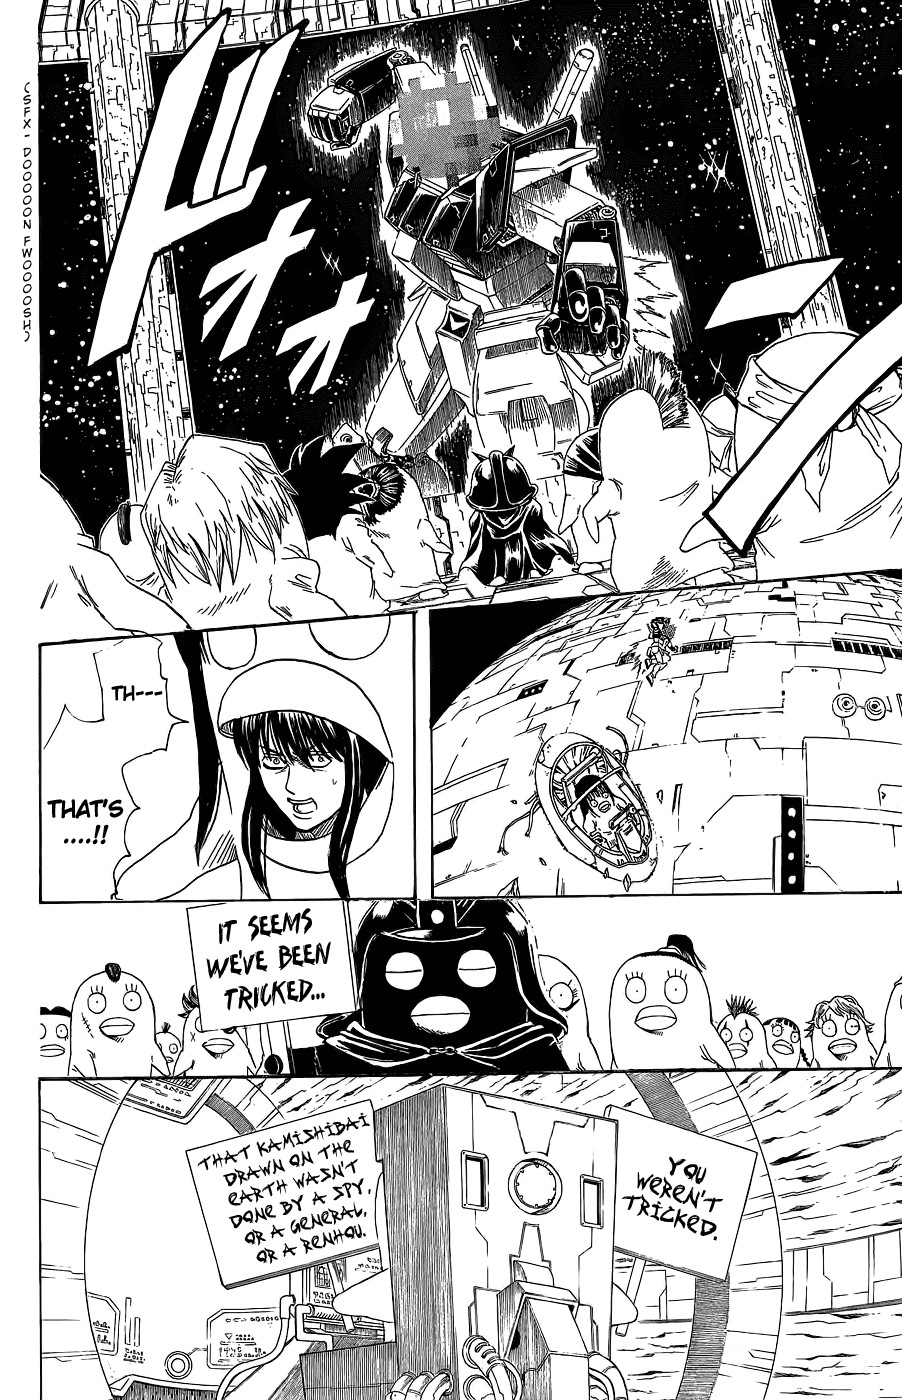 Gintama chapter 357 page 9